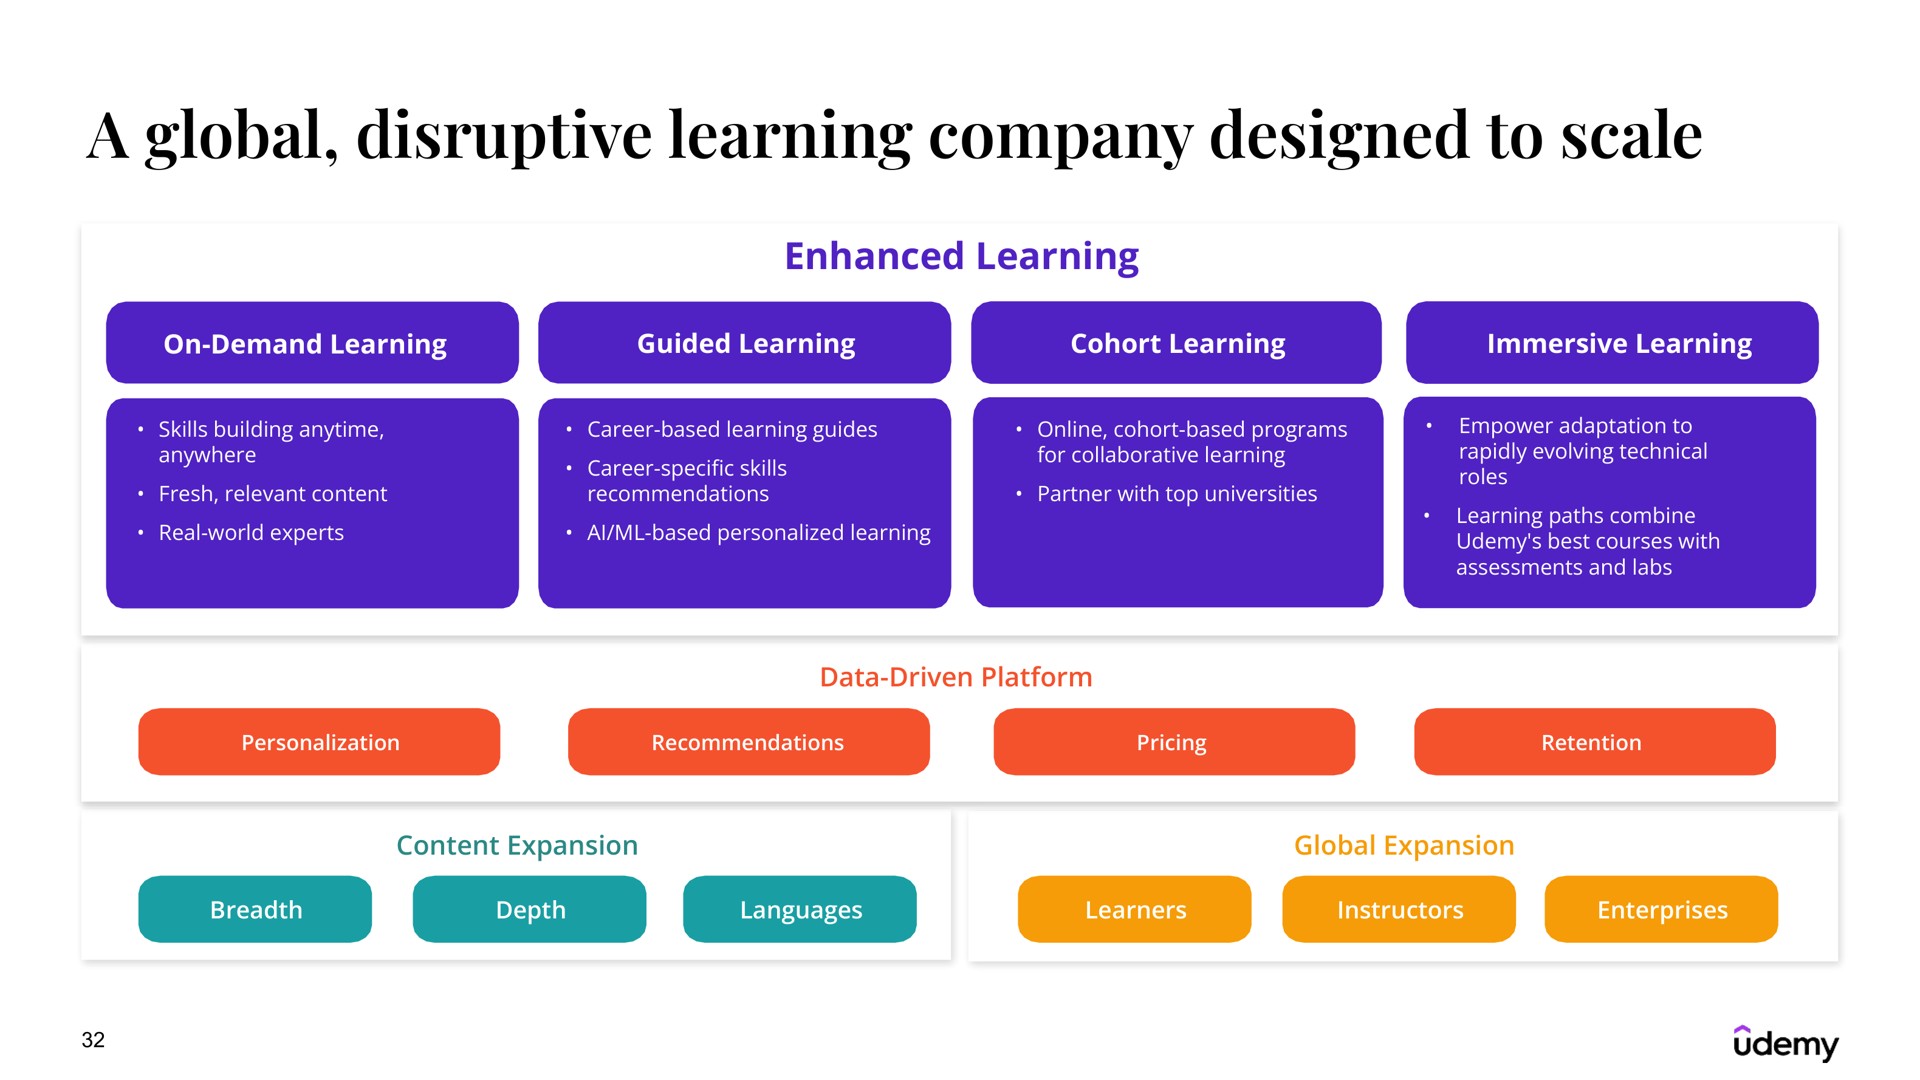 a global disruptive learning company designed to scale | Udemy